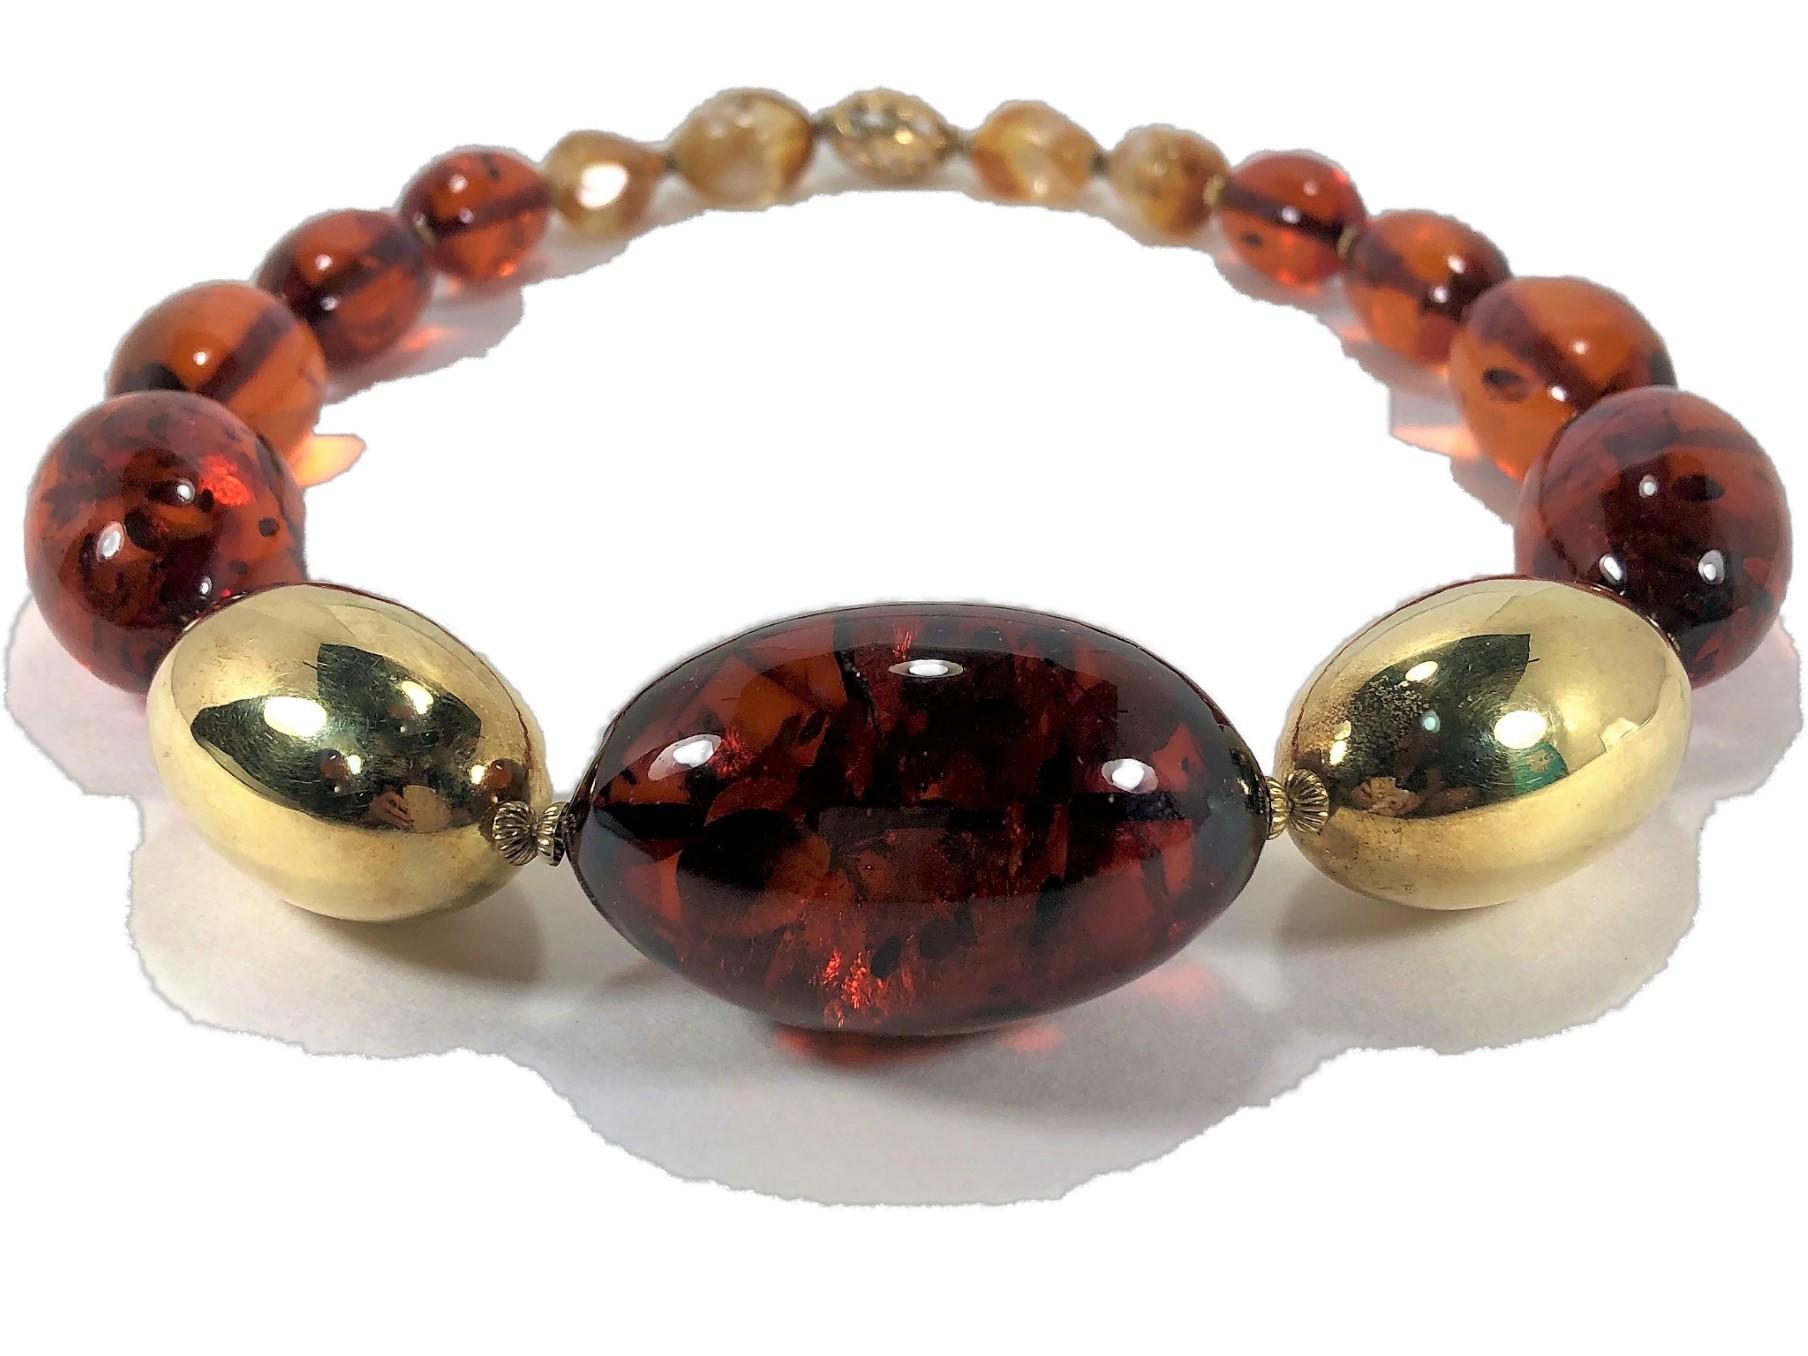 Made in Germany in the late 20th Century, this large 14K Yellow Gold and
Baltic Amber ovoid bead necklace makes a strong statement. The largest Amber
bead in the center measures 2 1/16 inches long by 1 1/4 inches wide. On either
side of the center